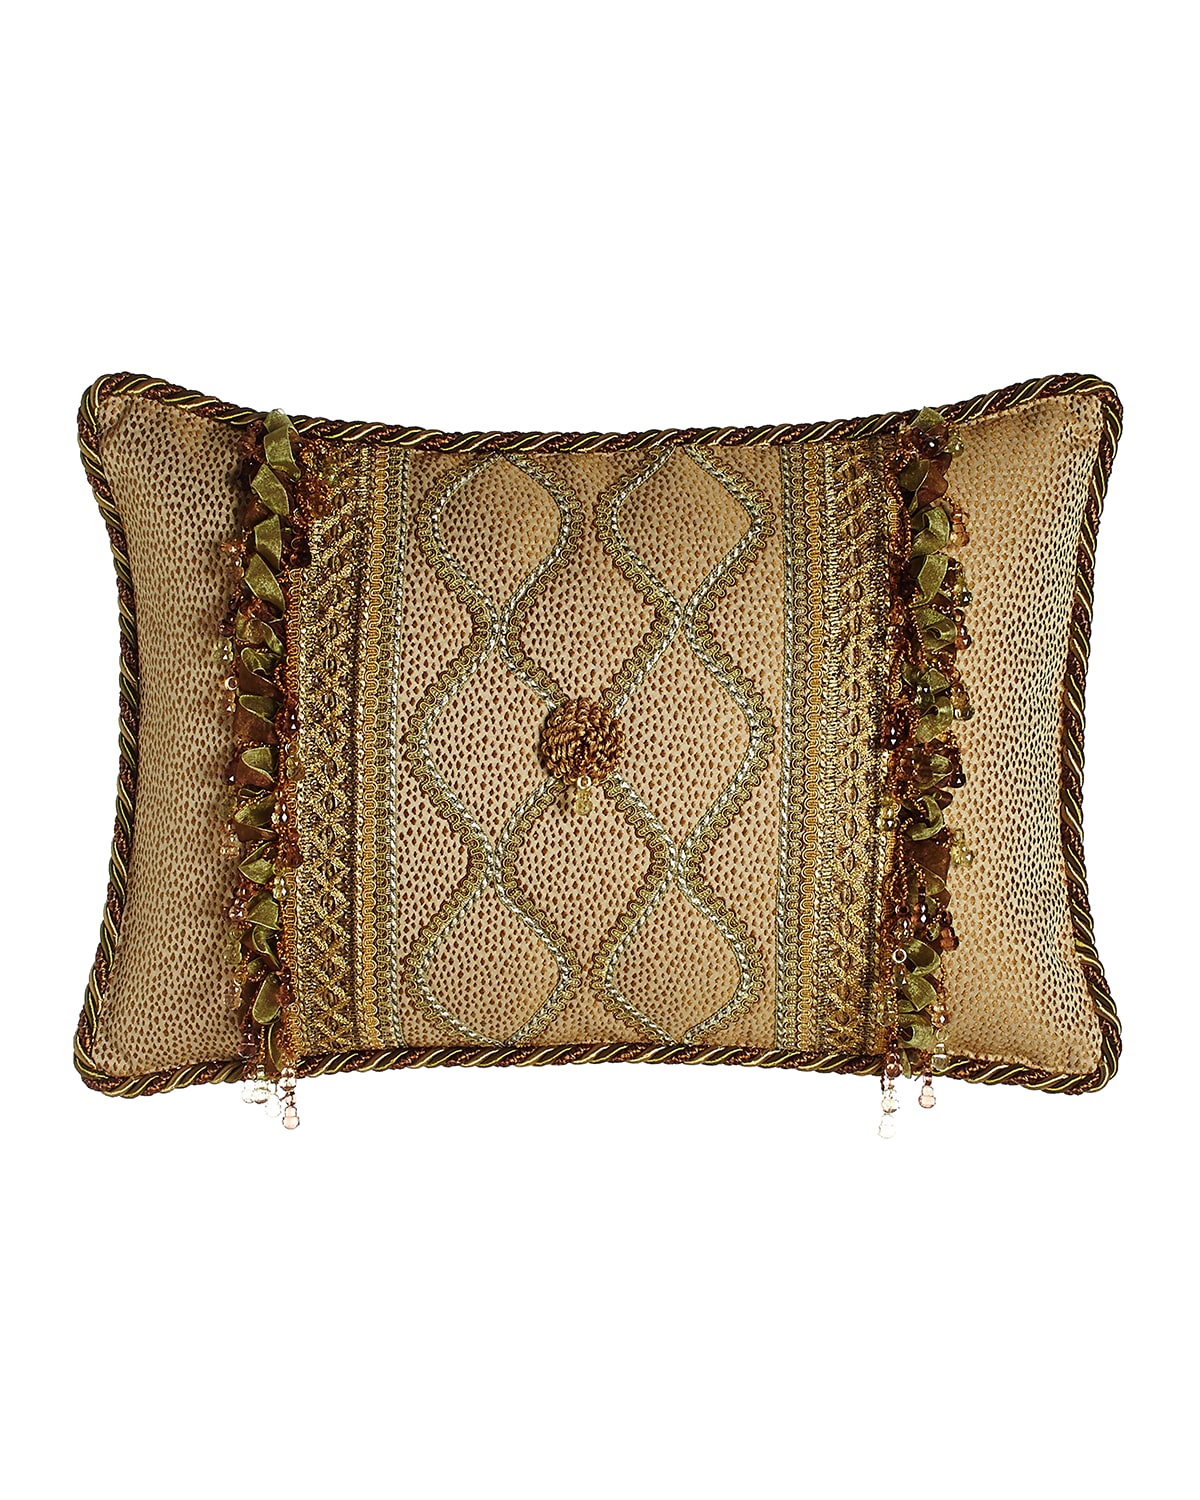 Image Sweet Dreams Oblong Rosette Pillow with Gimp Accents & Ribbon & Bead Fringe, 14" x 22"